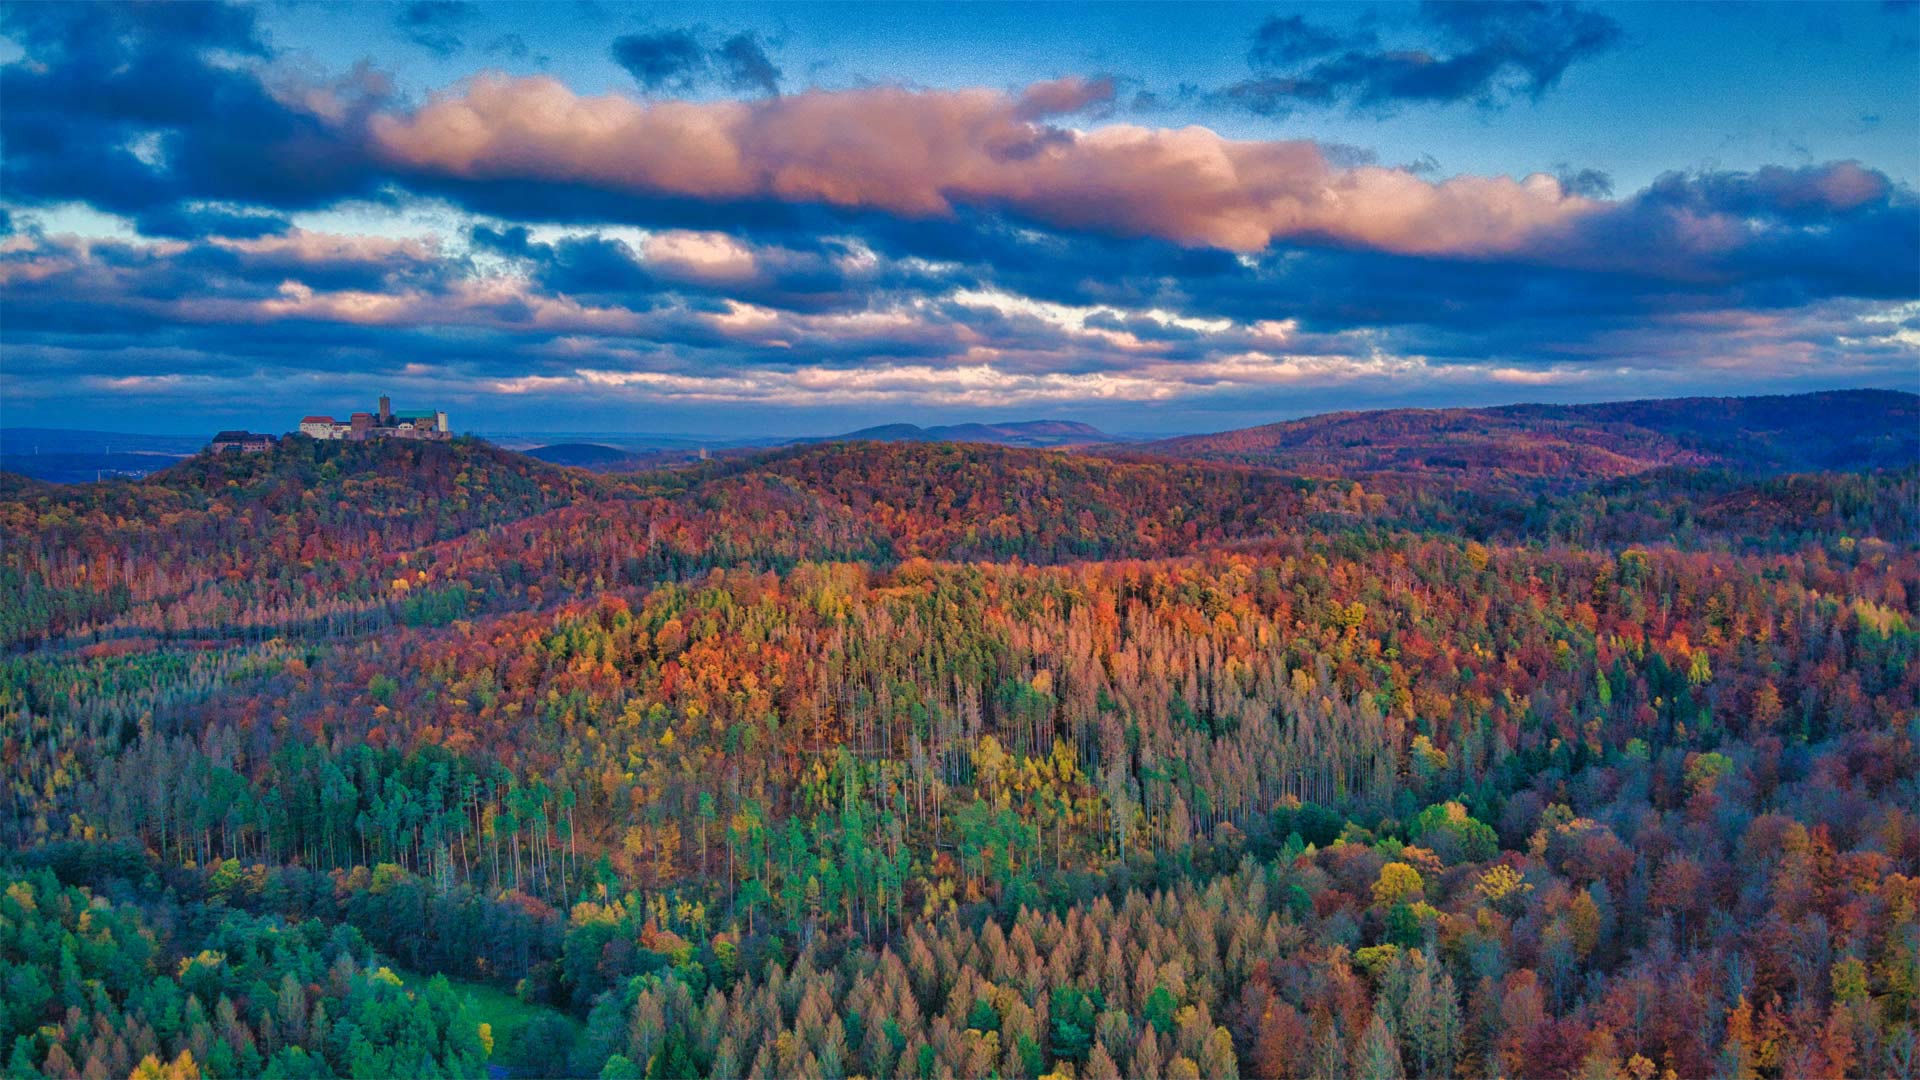 Thuringian Forest in autumn with Wartburg Castle, Germany - ezypix/Getty Images)